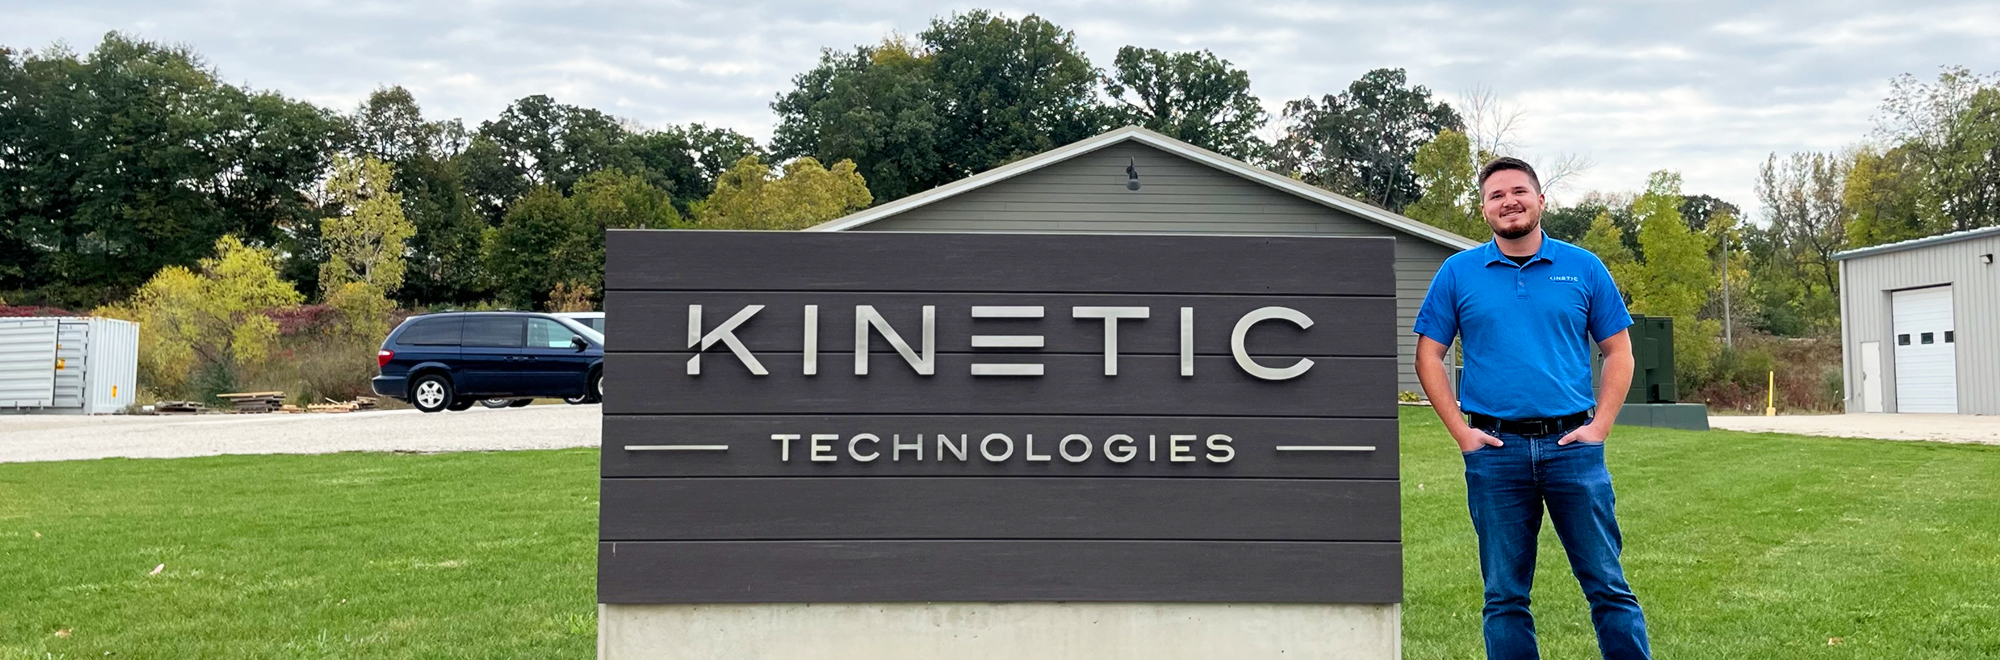 Kinetic Technologies About Us